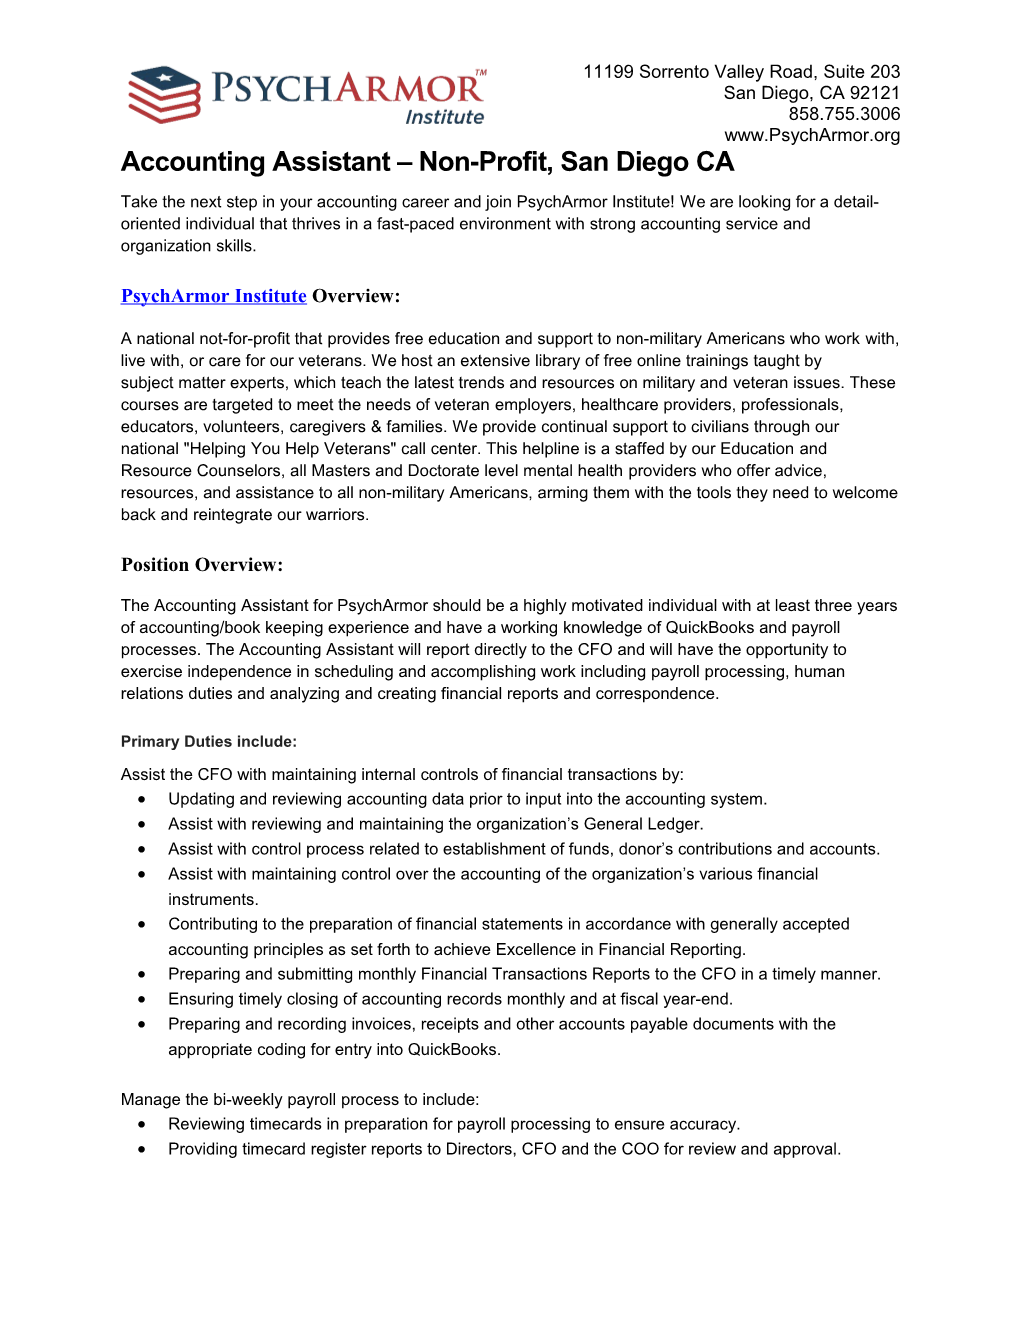 Accounting Assistant Non-Profit, San Diego CA